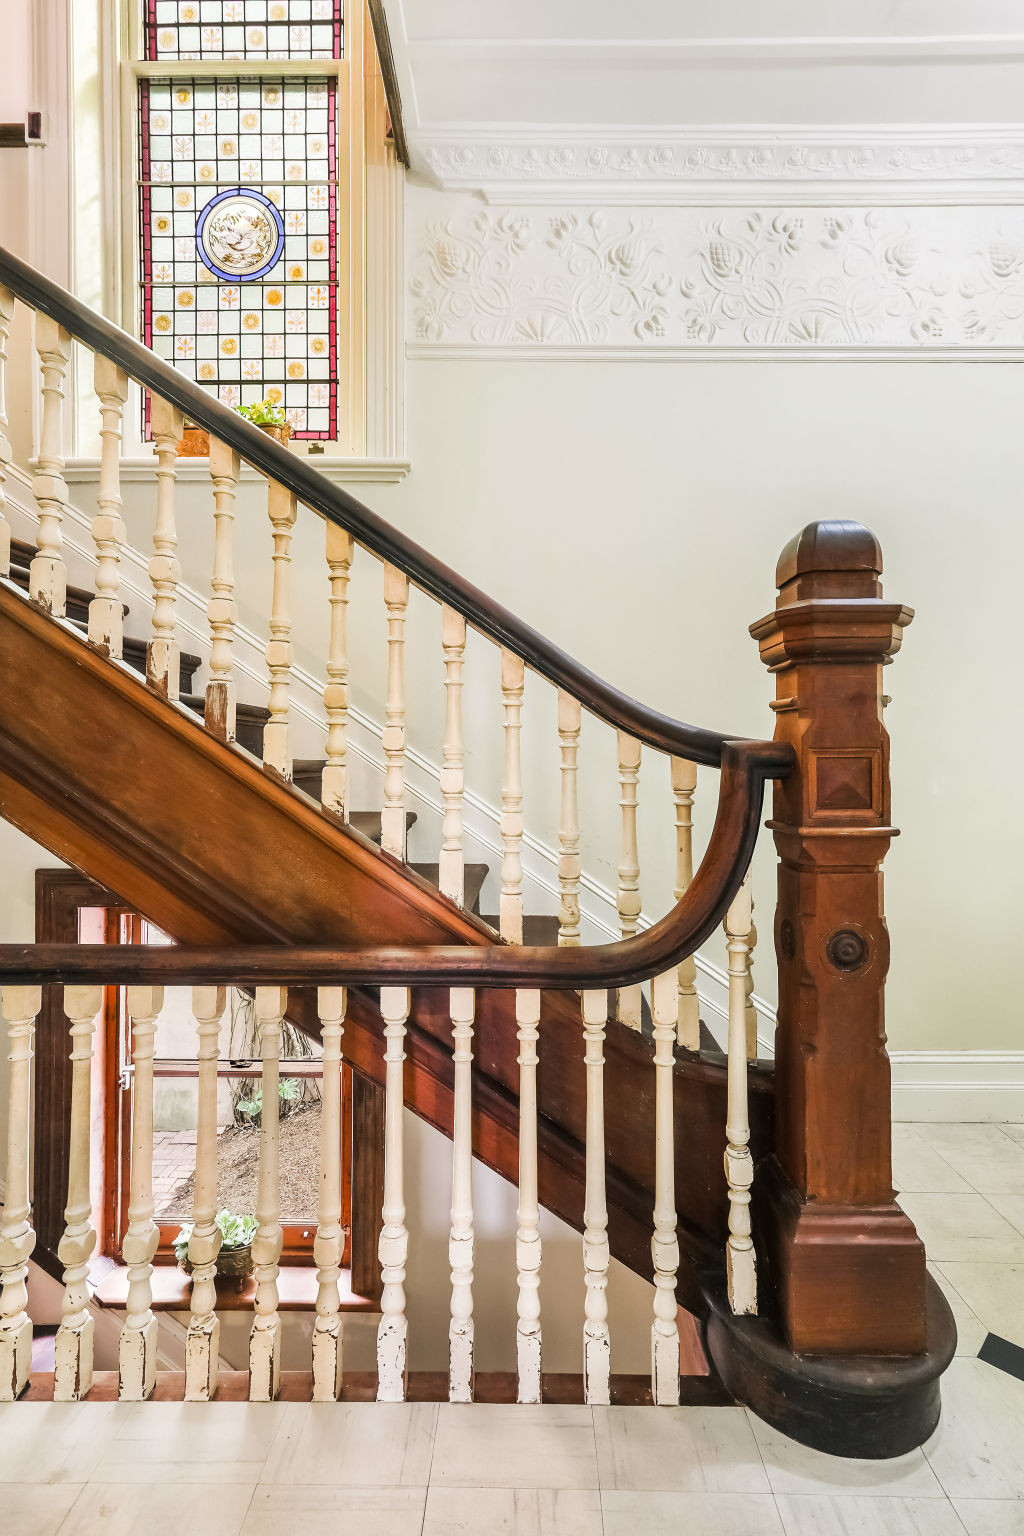 The home is filled with period features including verandahs and a cedar staircase.